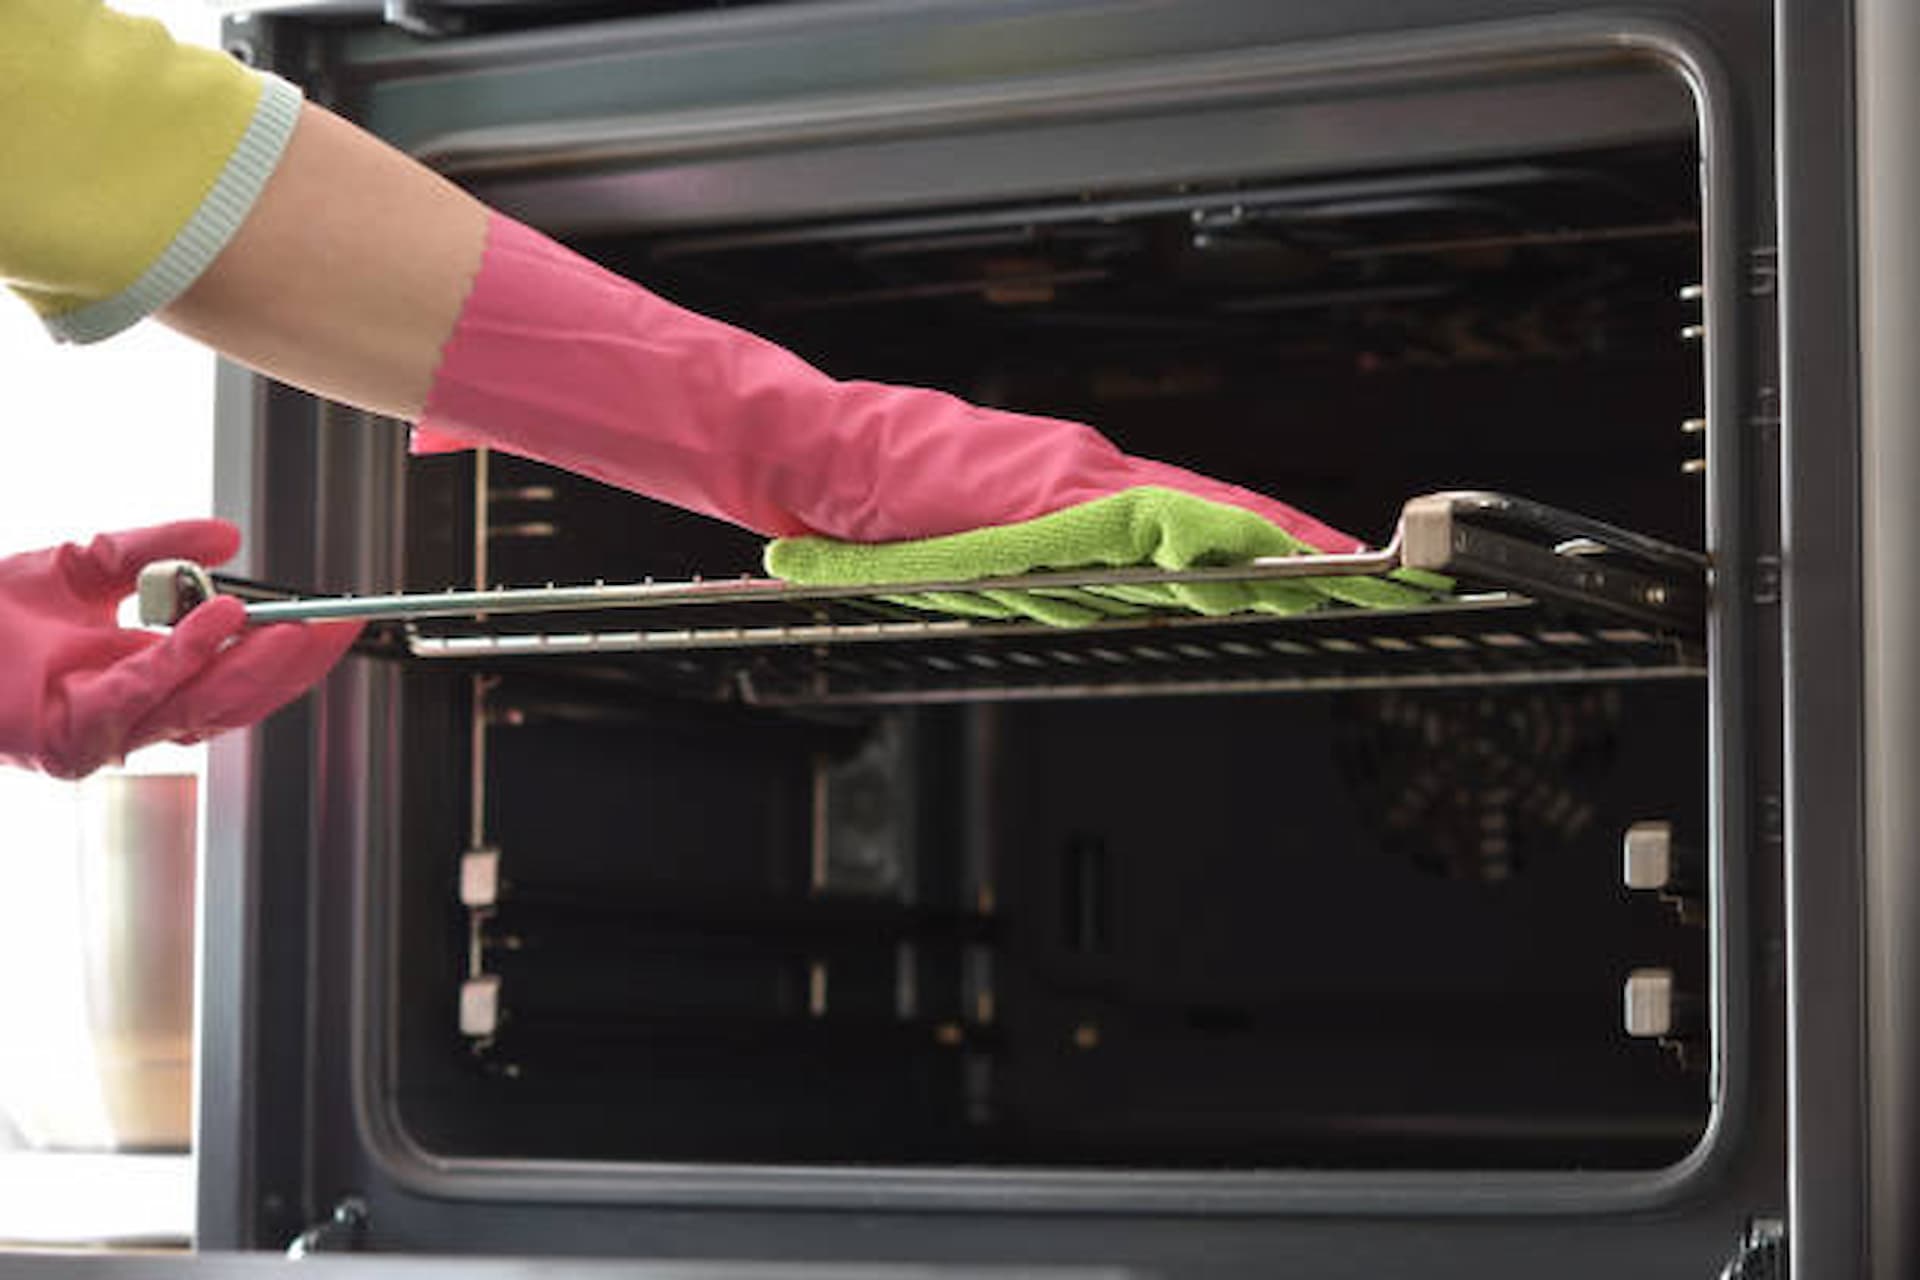 Oven Cleaning Maintenance: How Often Should You Clean Your Oven?